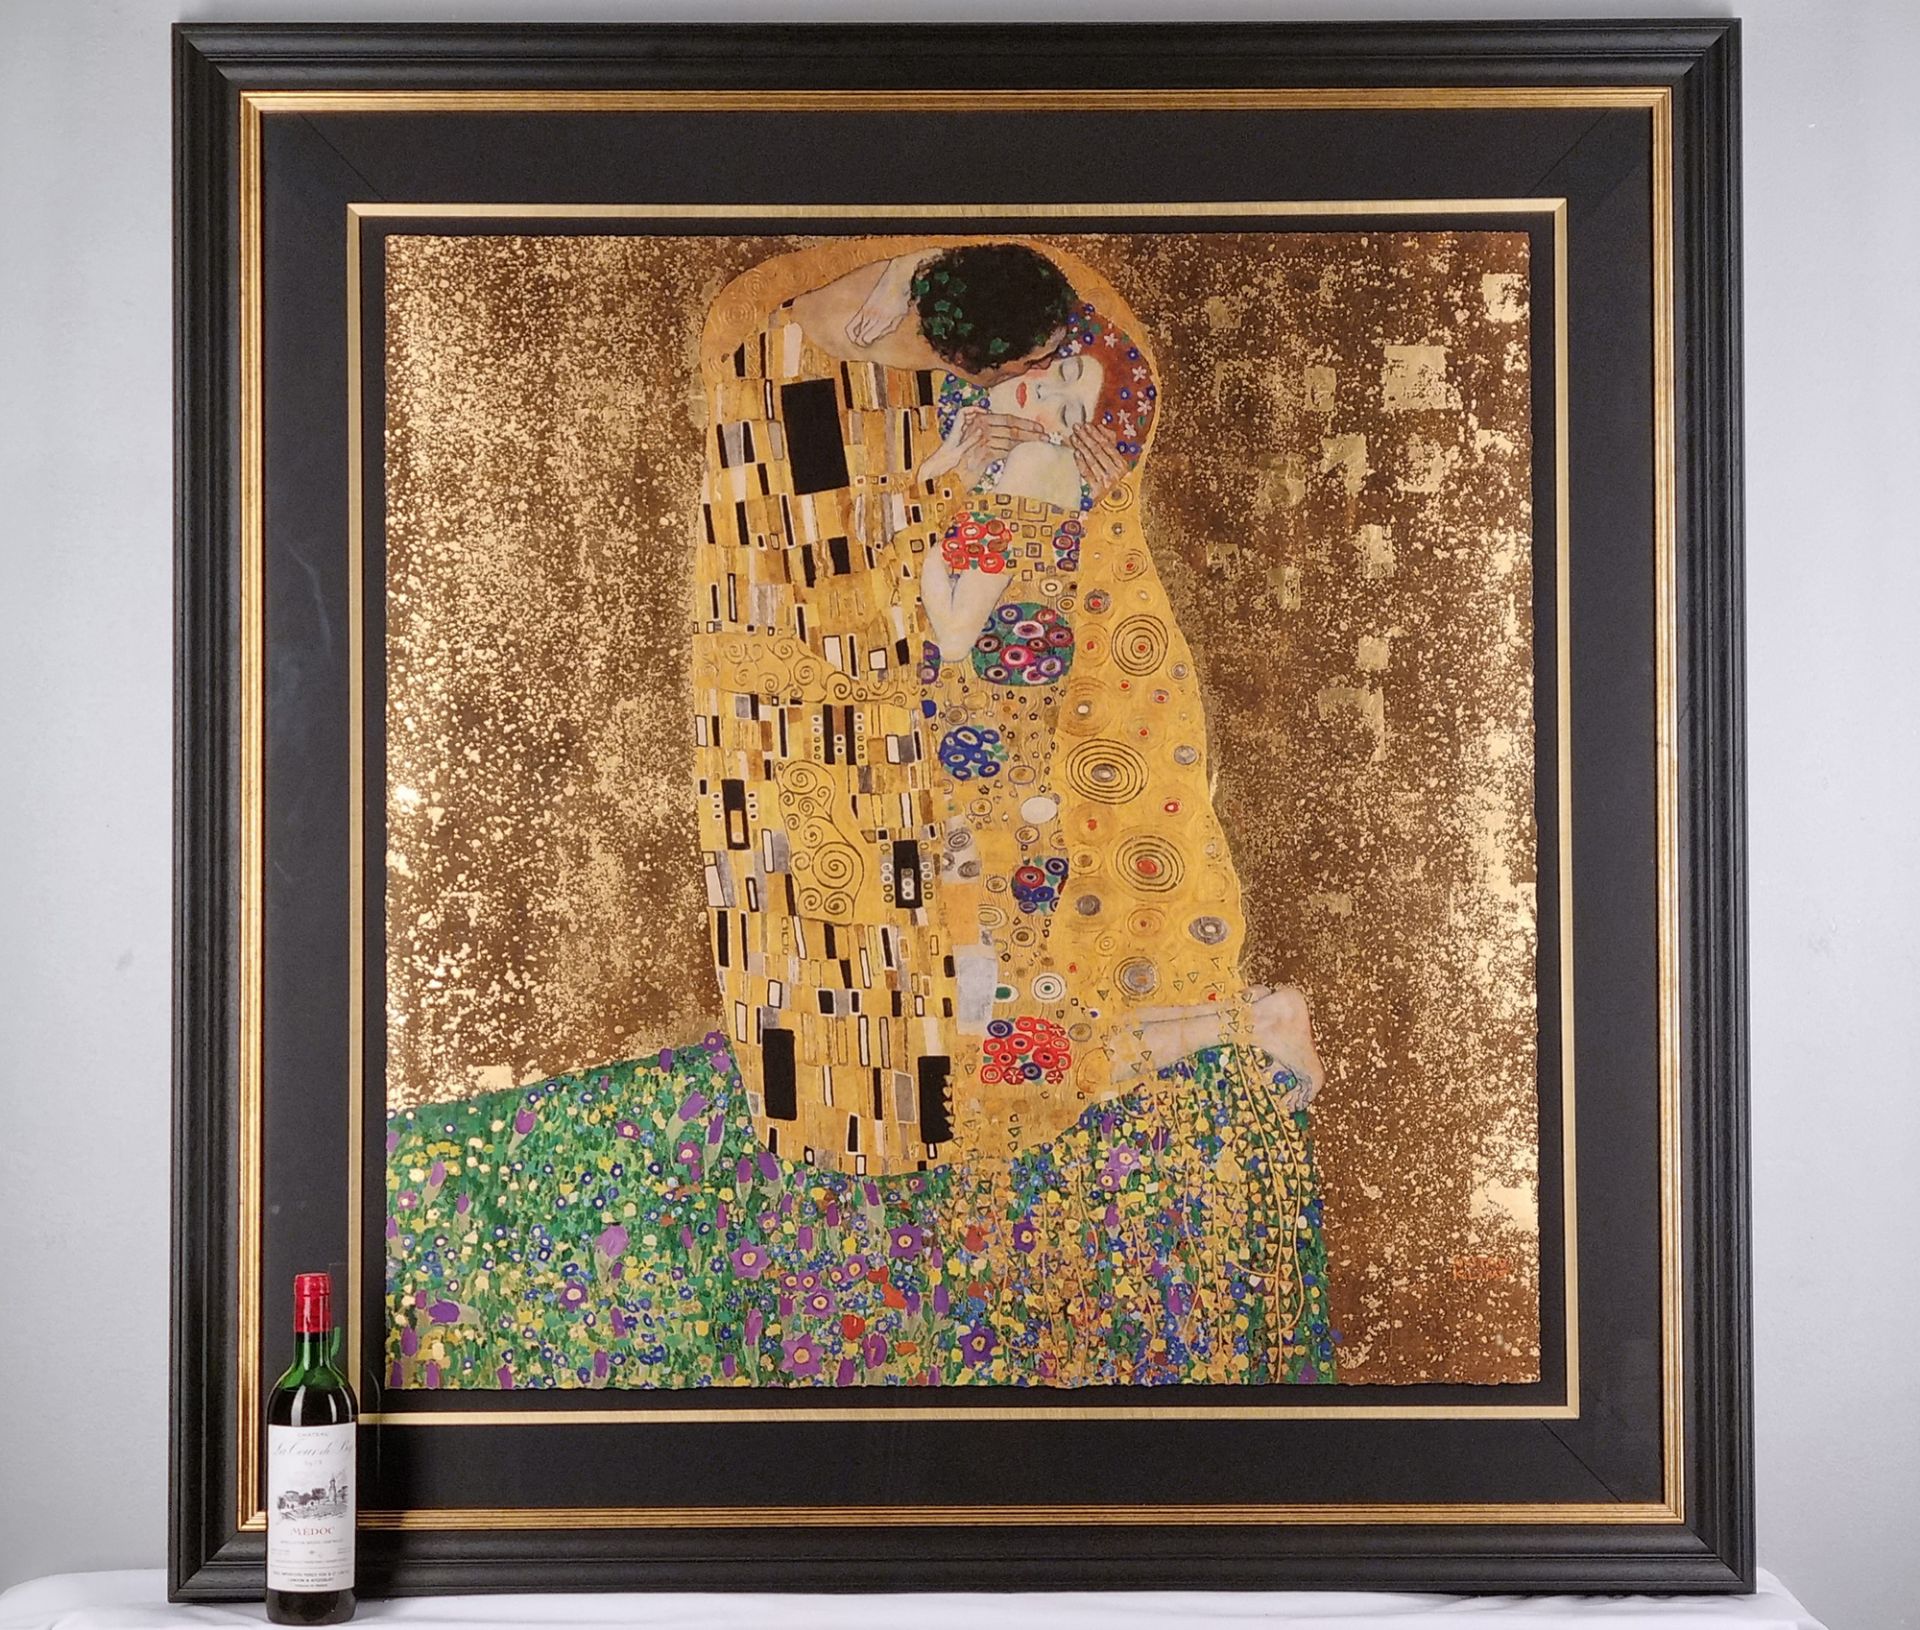 Outstanding 22 Carat Gold Gustav Klimt ""The Kiss"" Limited Edition. - Image 2 of 12